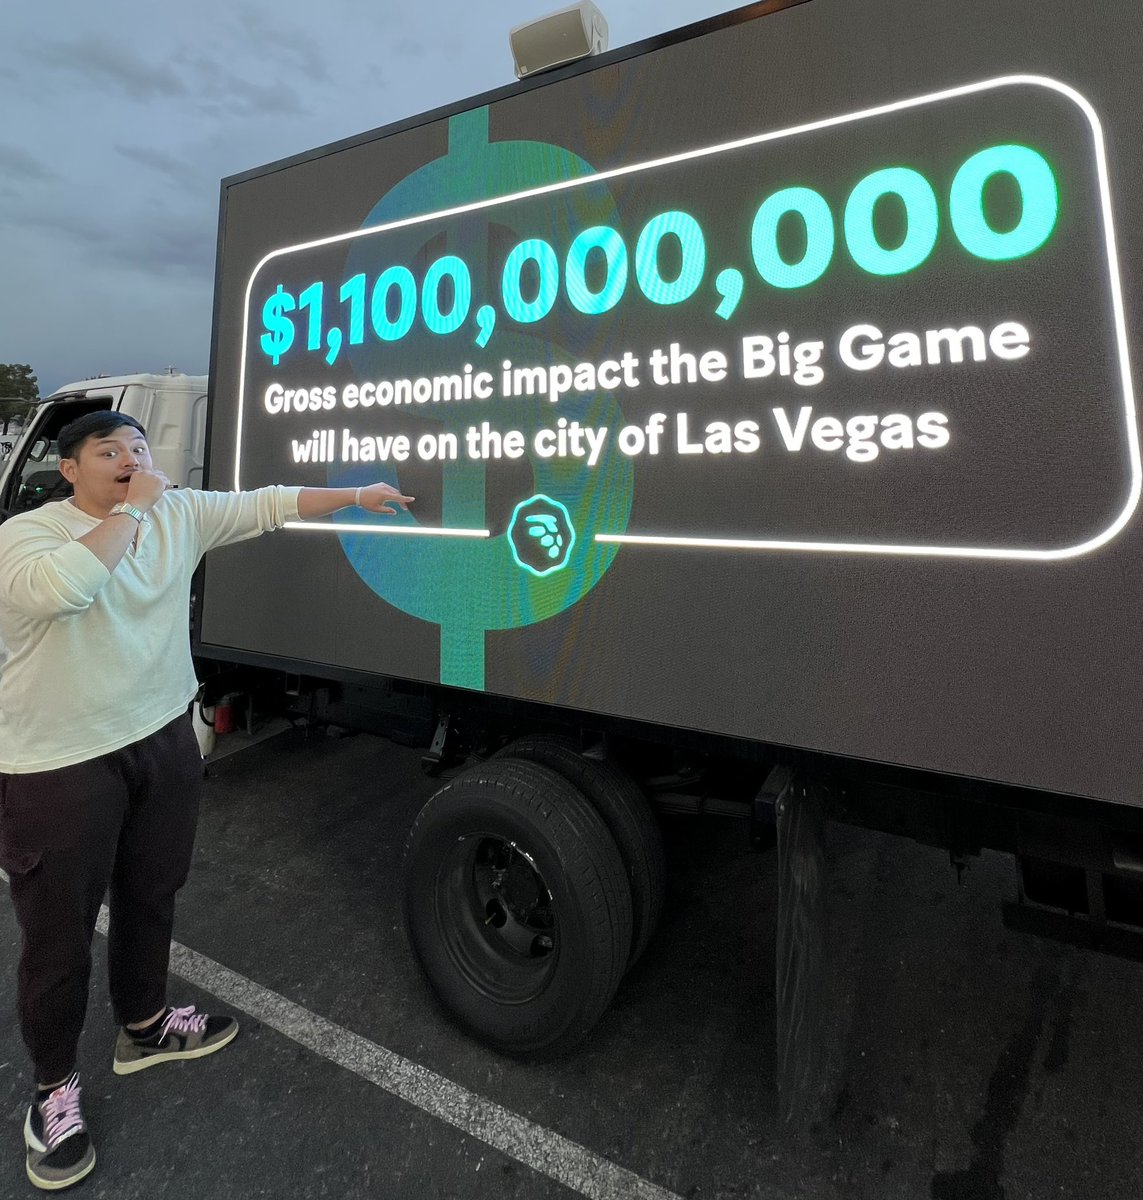 Do you #KnowMoney? Be sure to tag us if you see the #MoneyLion truck in Las Vegas for #SuperBowl2024. 

#SaturdayMood #finance #moneycontrol 

Be sure to follow the link and take control of your finances: 

moneylion.com/know-money/